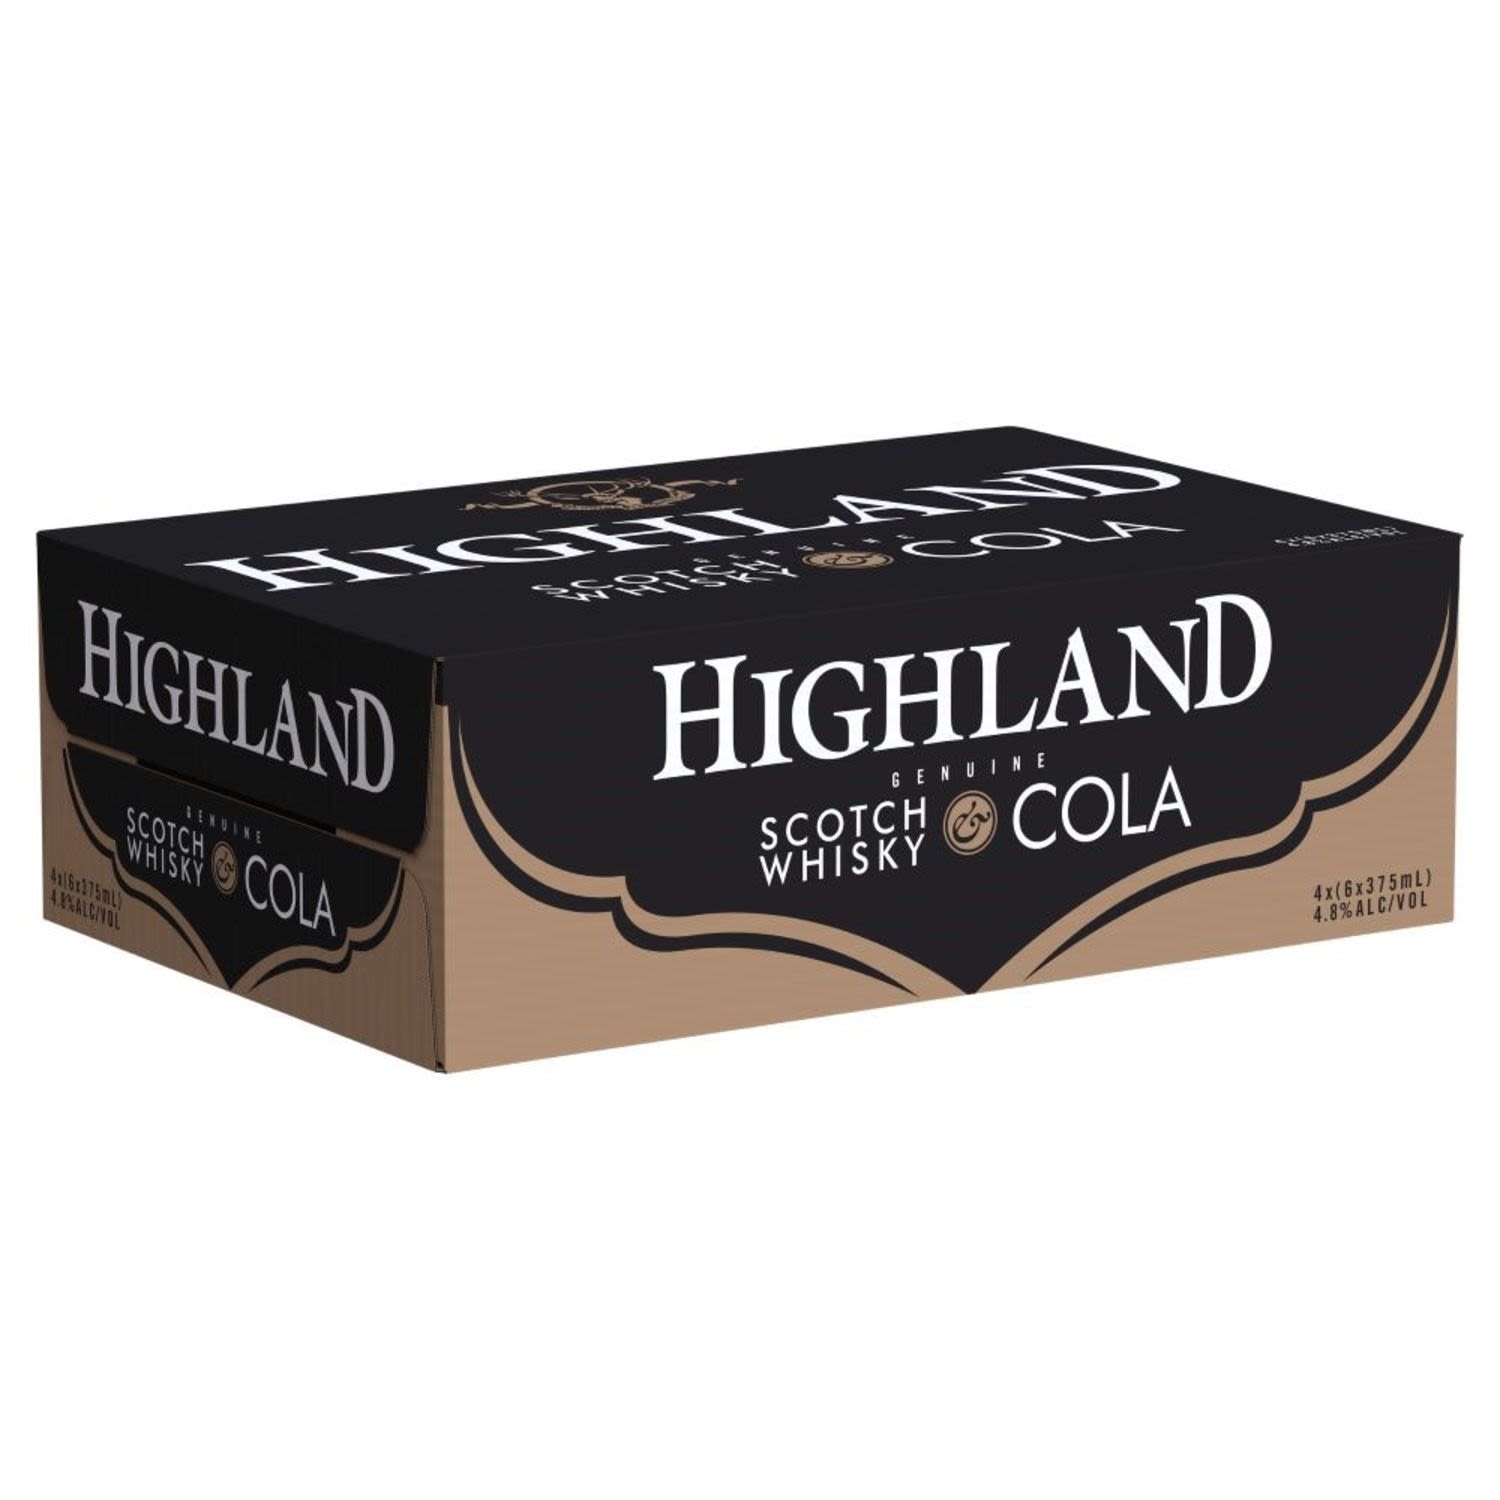 Highland Genuine Scotch Whisky & Cola 4.8% Can 375mL 24 Pack